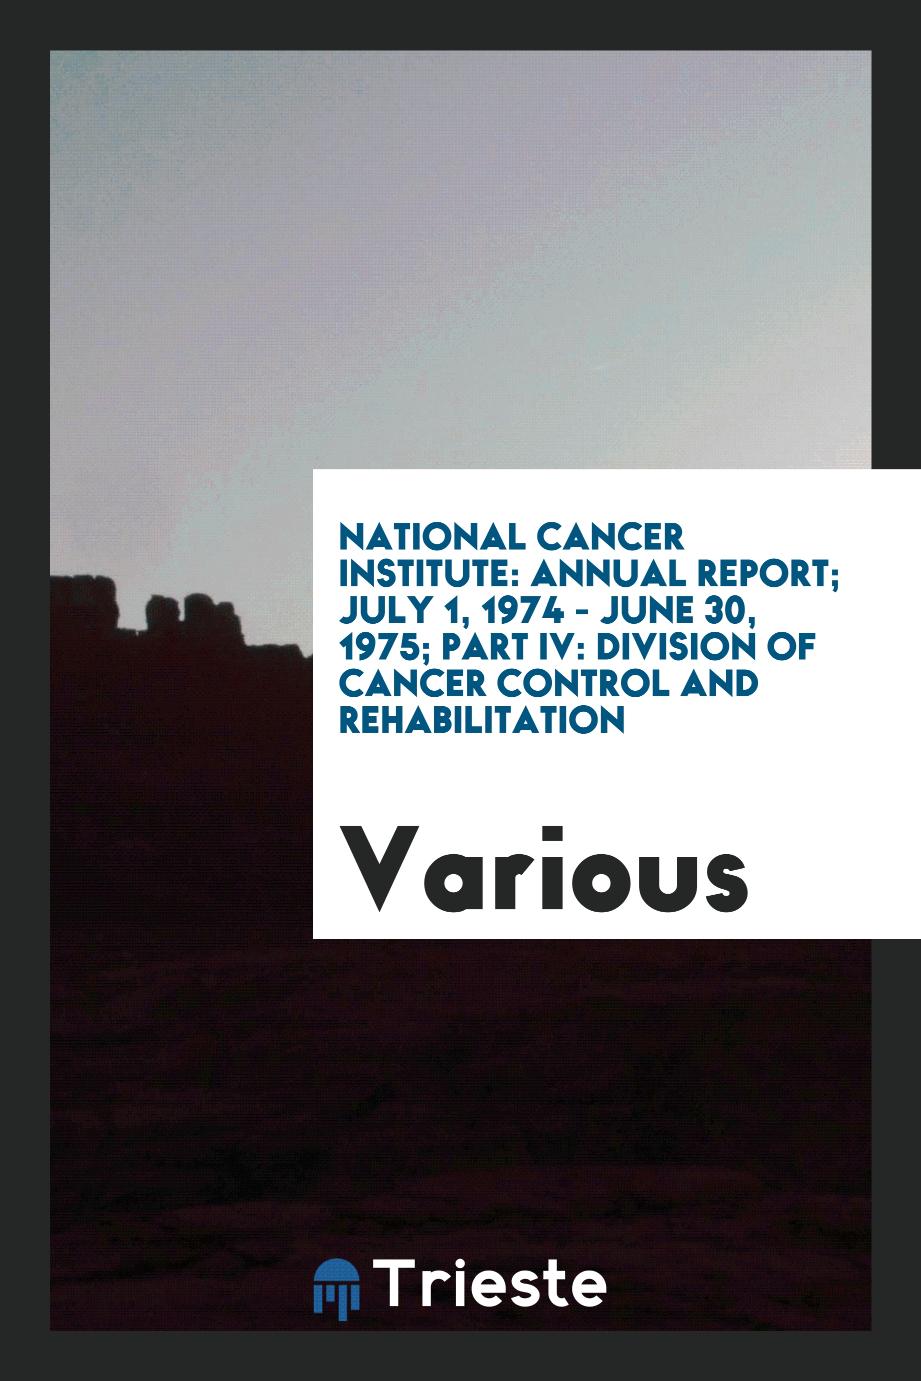 National Cancer Institute: Annual Report; July 1, 1974 - June 30, 1975; Part IV: Division of Cancer Control and Rehabilitation